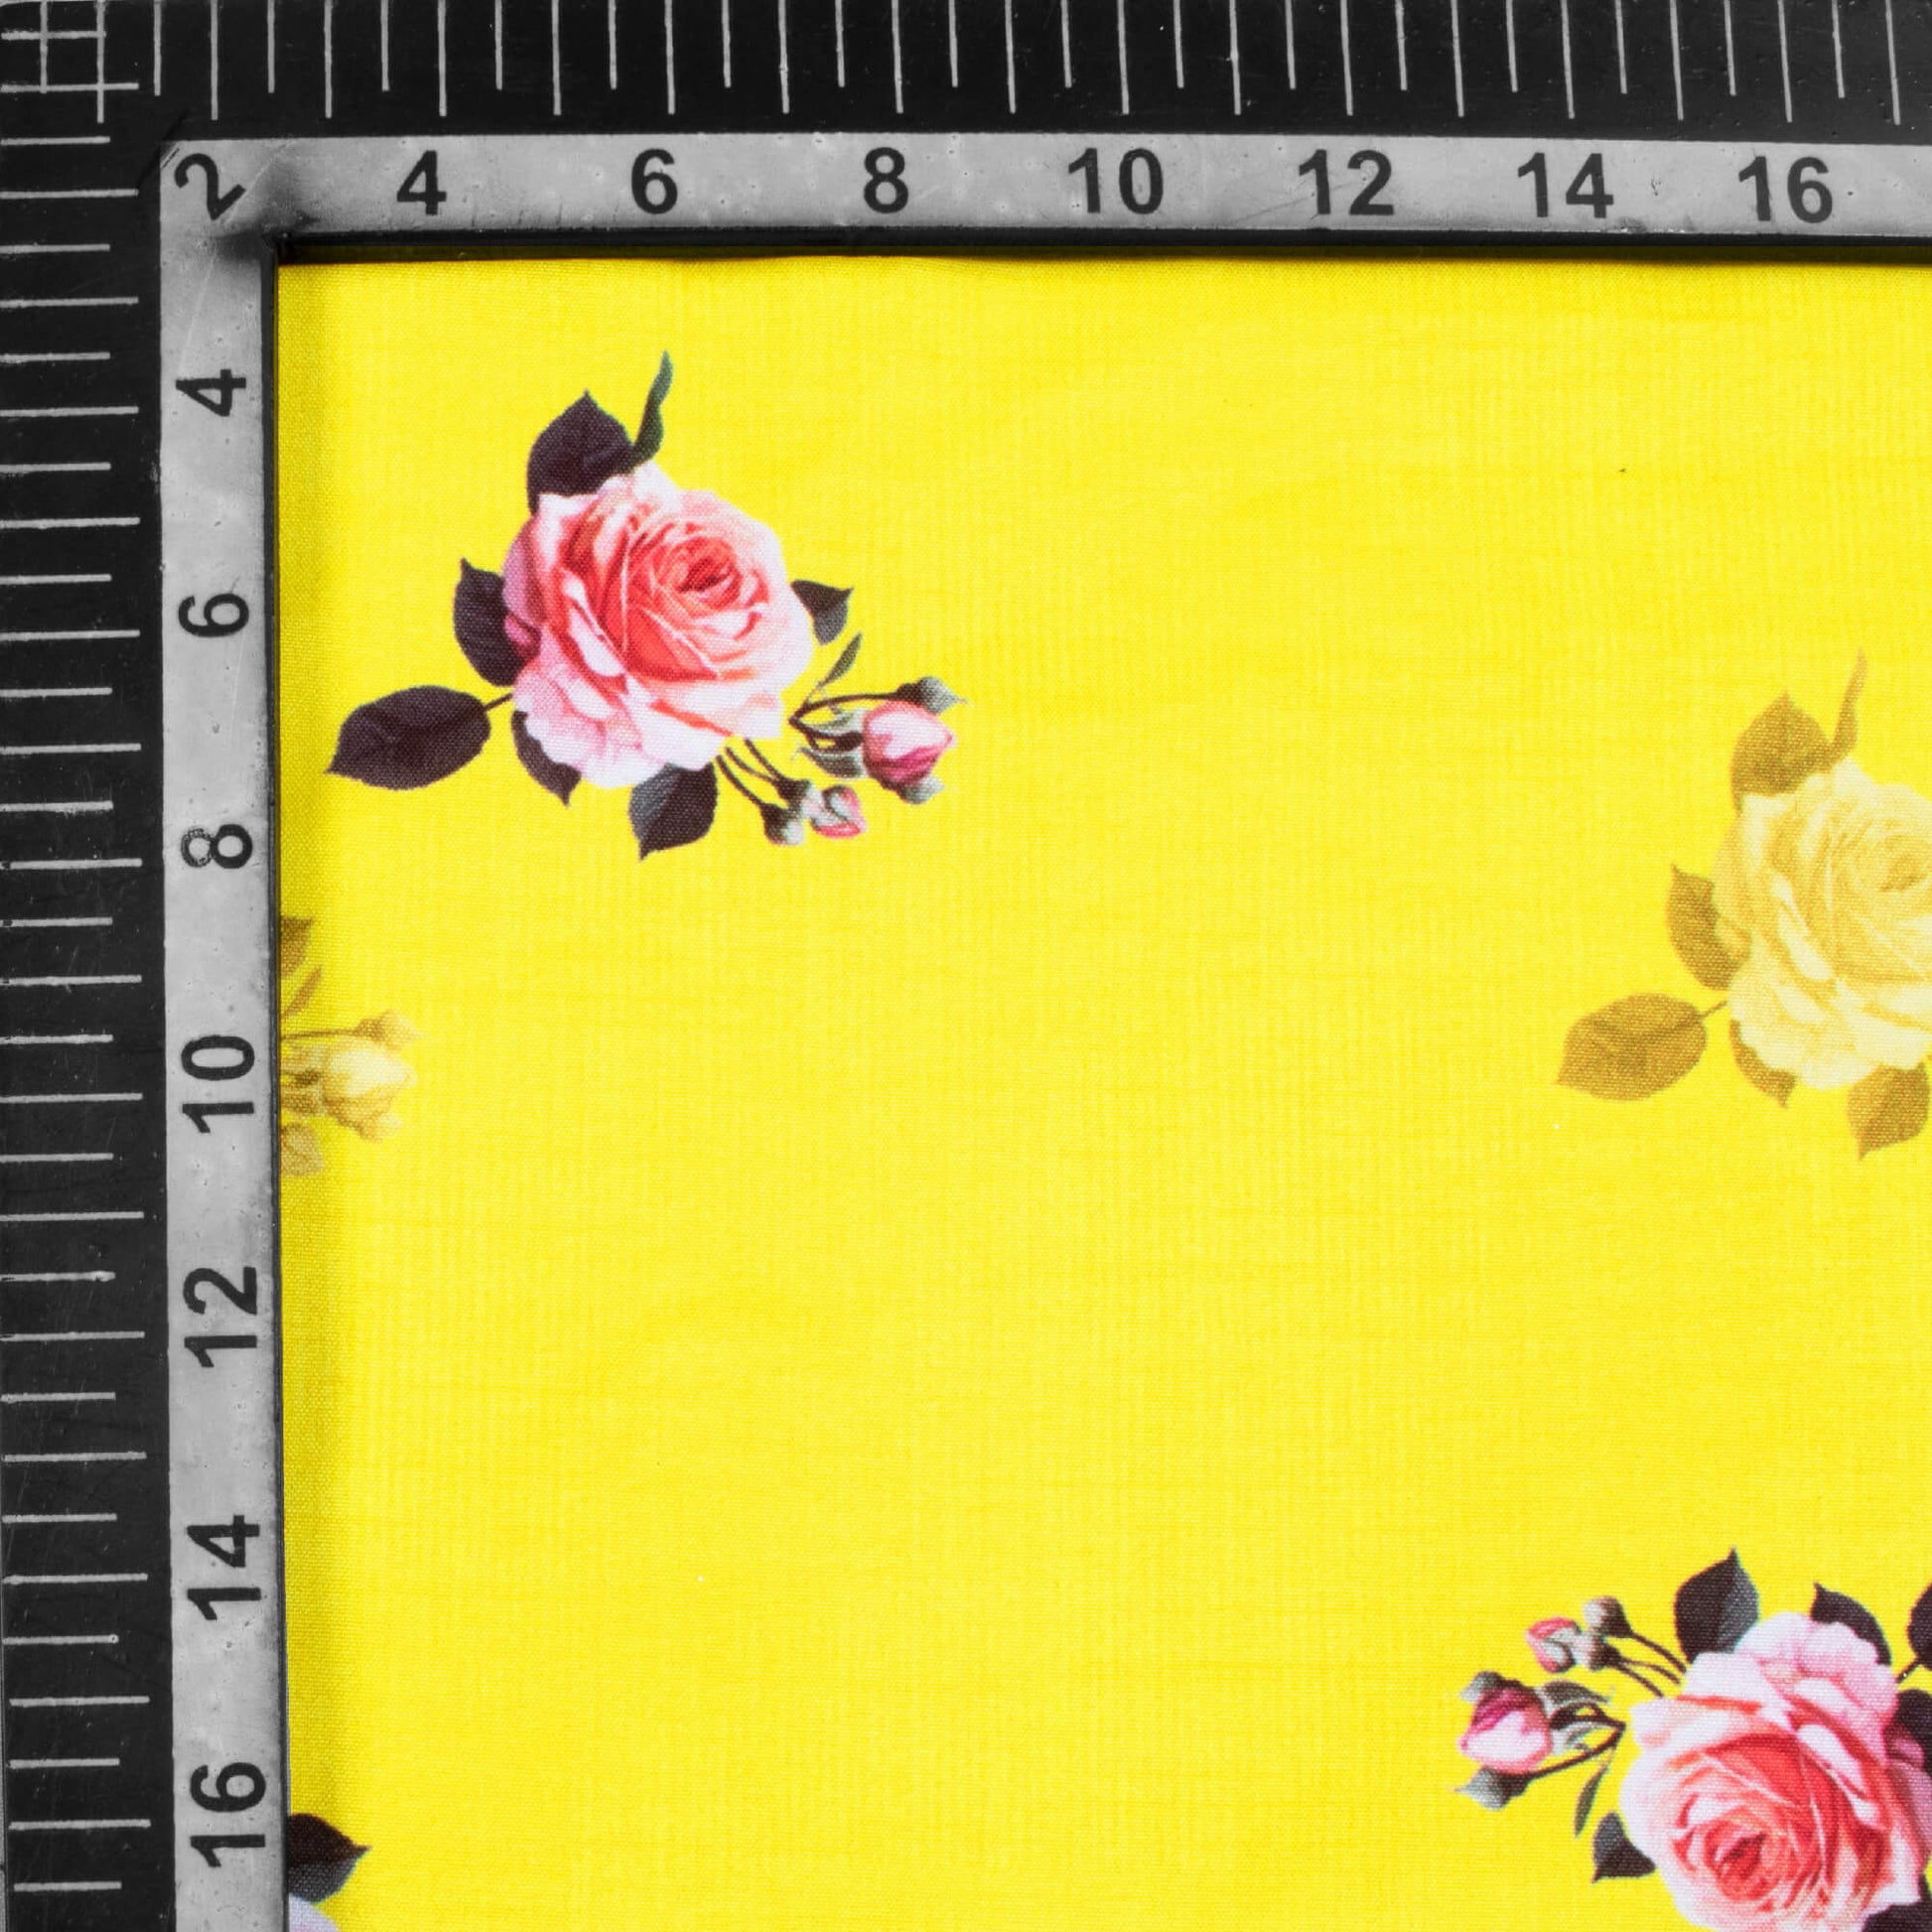 Sunshine Yellow And Taffy Pink Floral Pattern Digital Print Ultra Premium Butter Crepe Fabric - Fabcurate